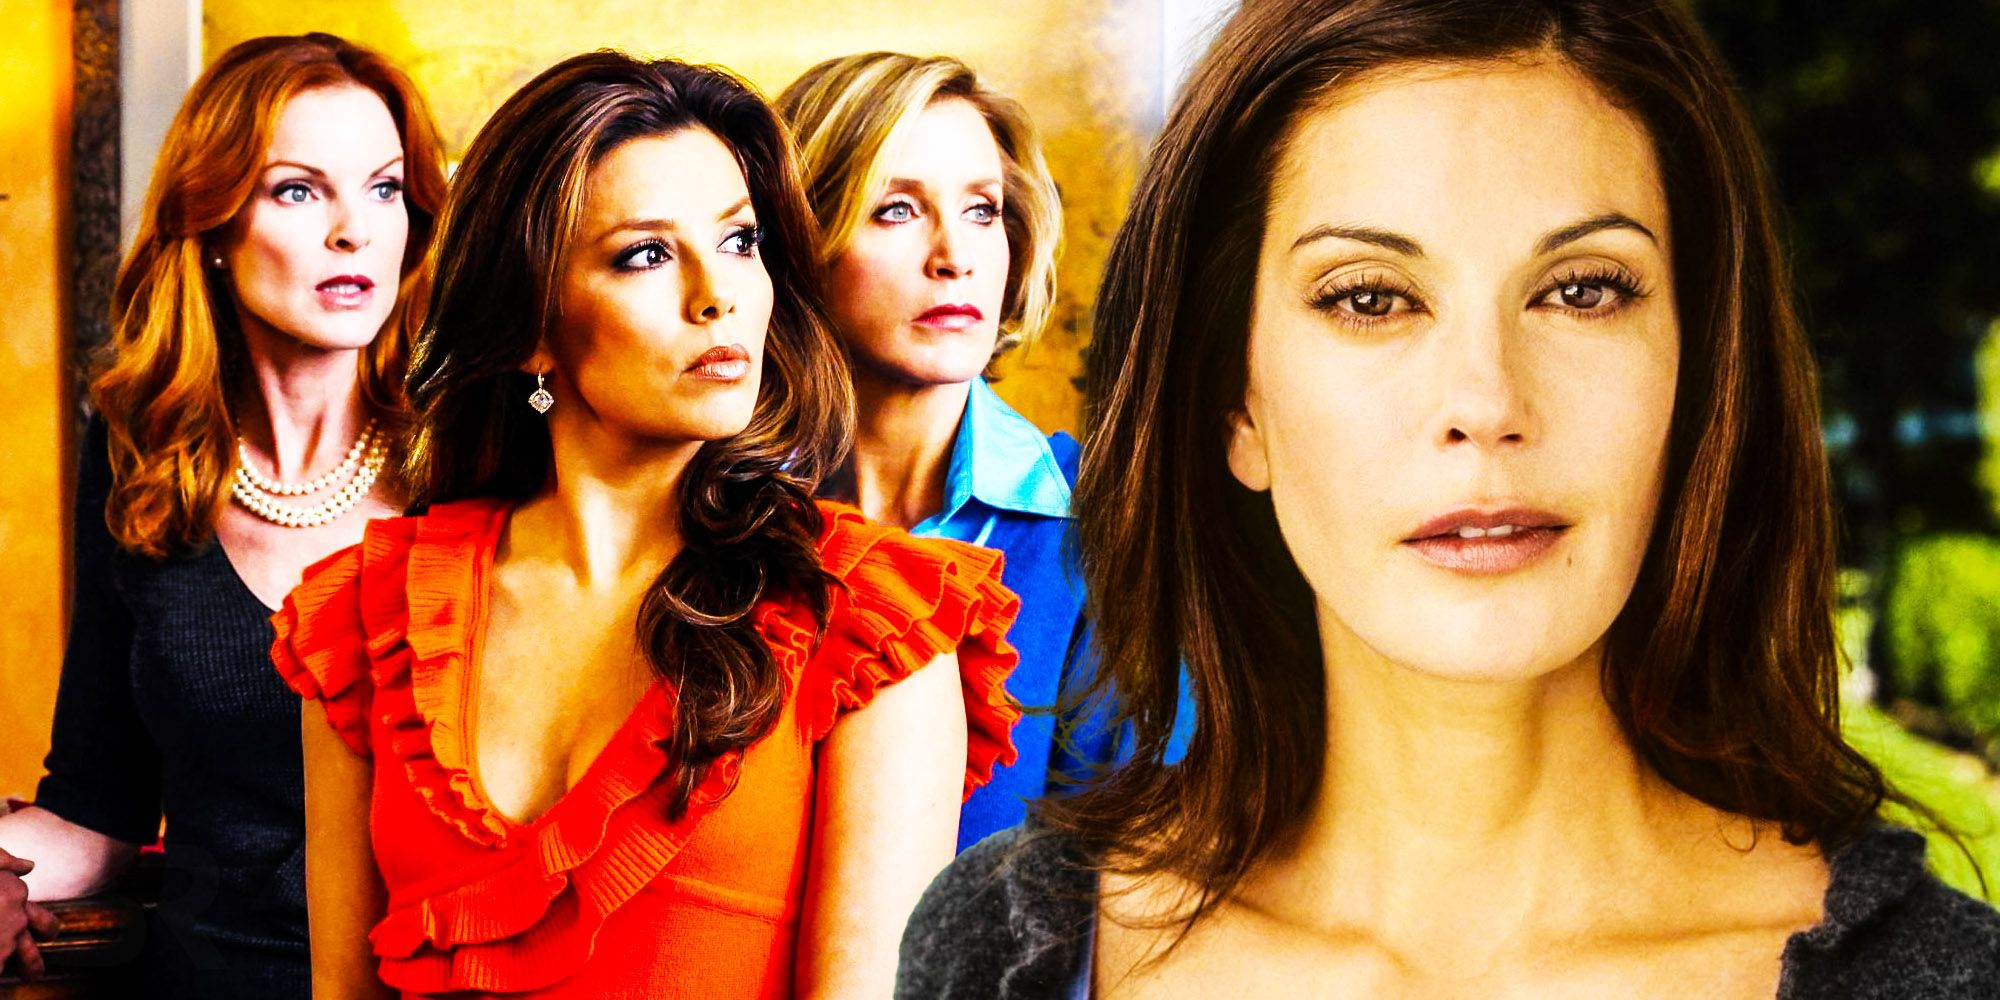 A blended image features Desperate Housewives characters Bree (Marcia Cross), Gaby (Eva Longoria) Lynette (Felicity Huffman), and Susan (Teri Hatcher)